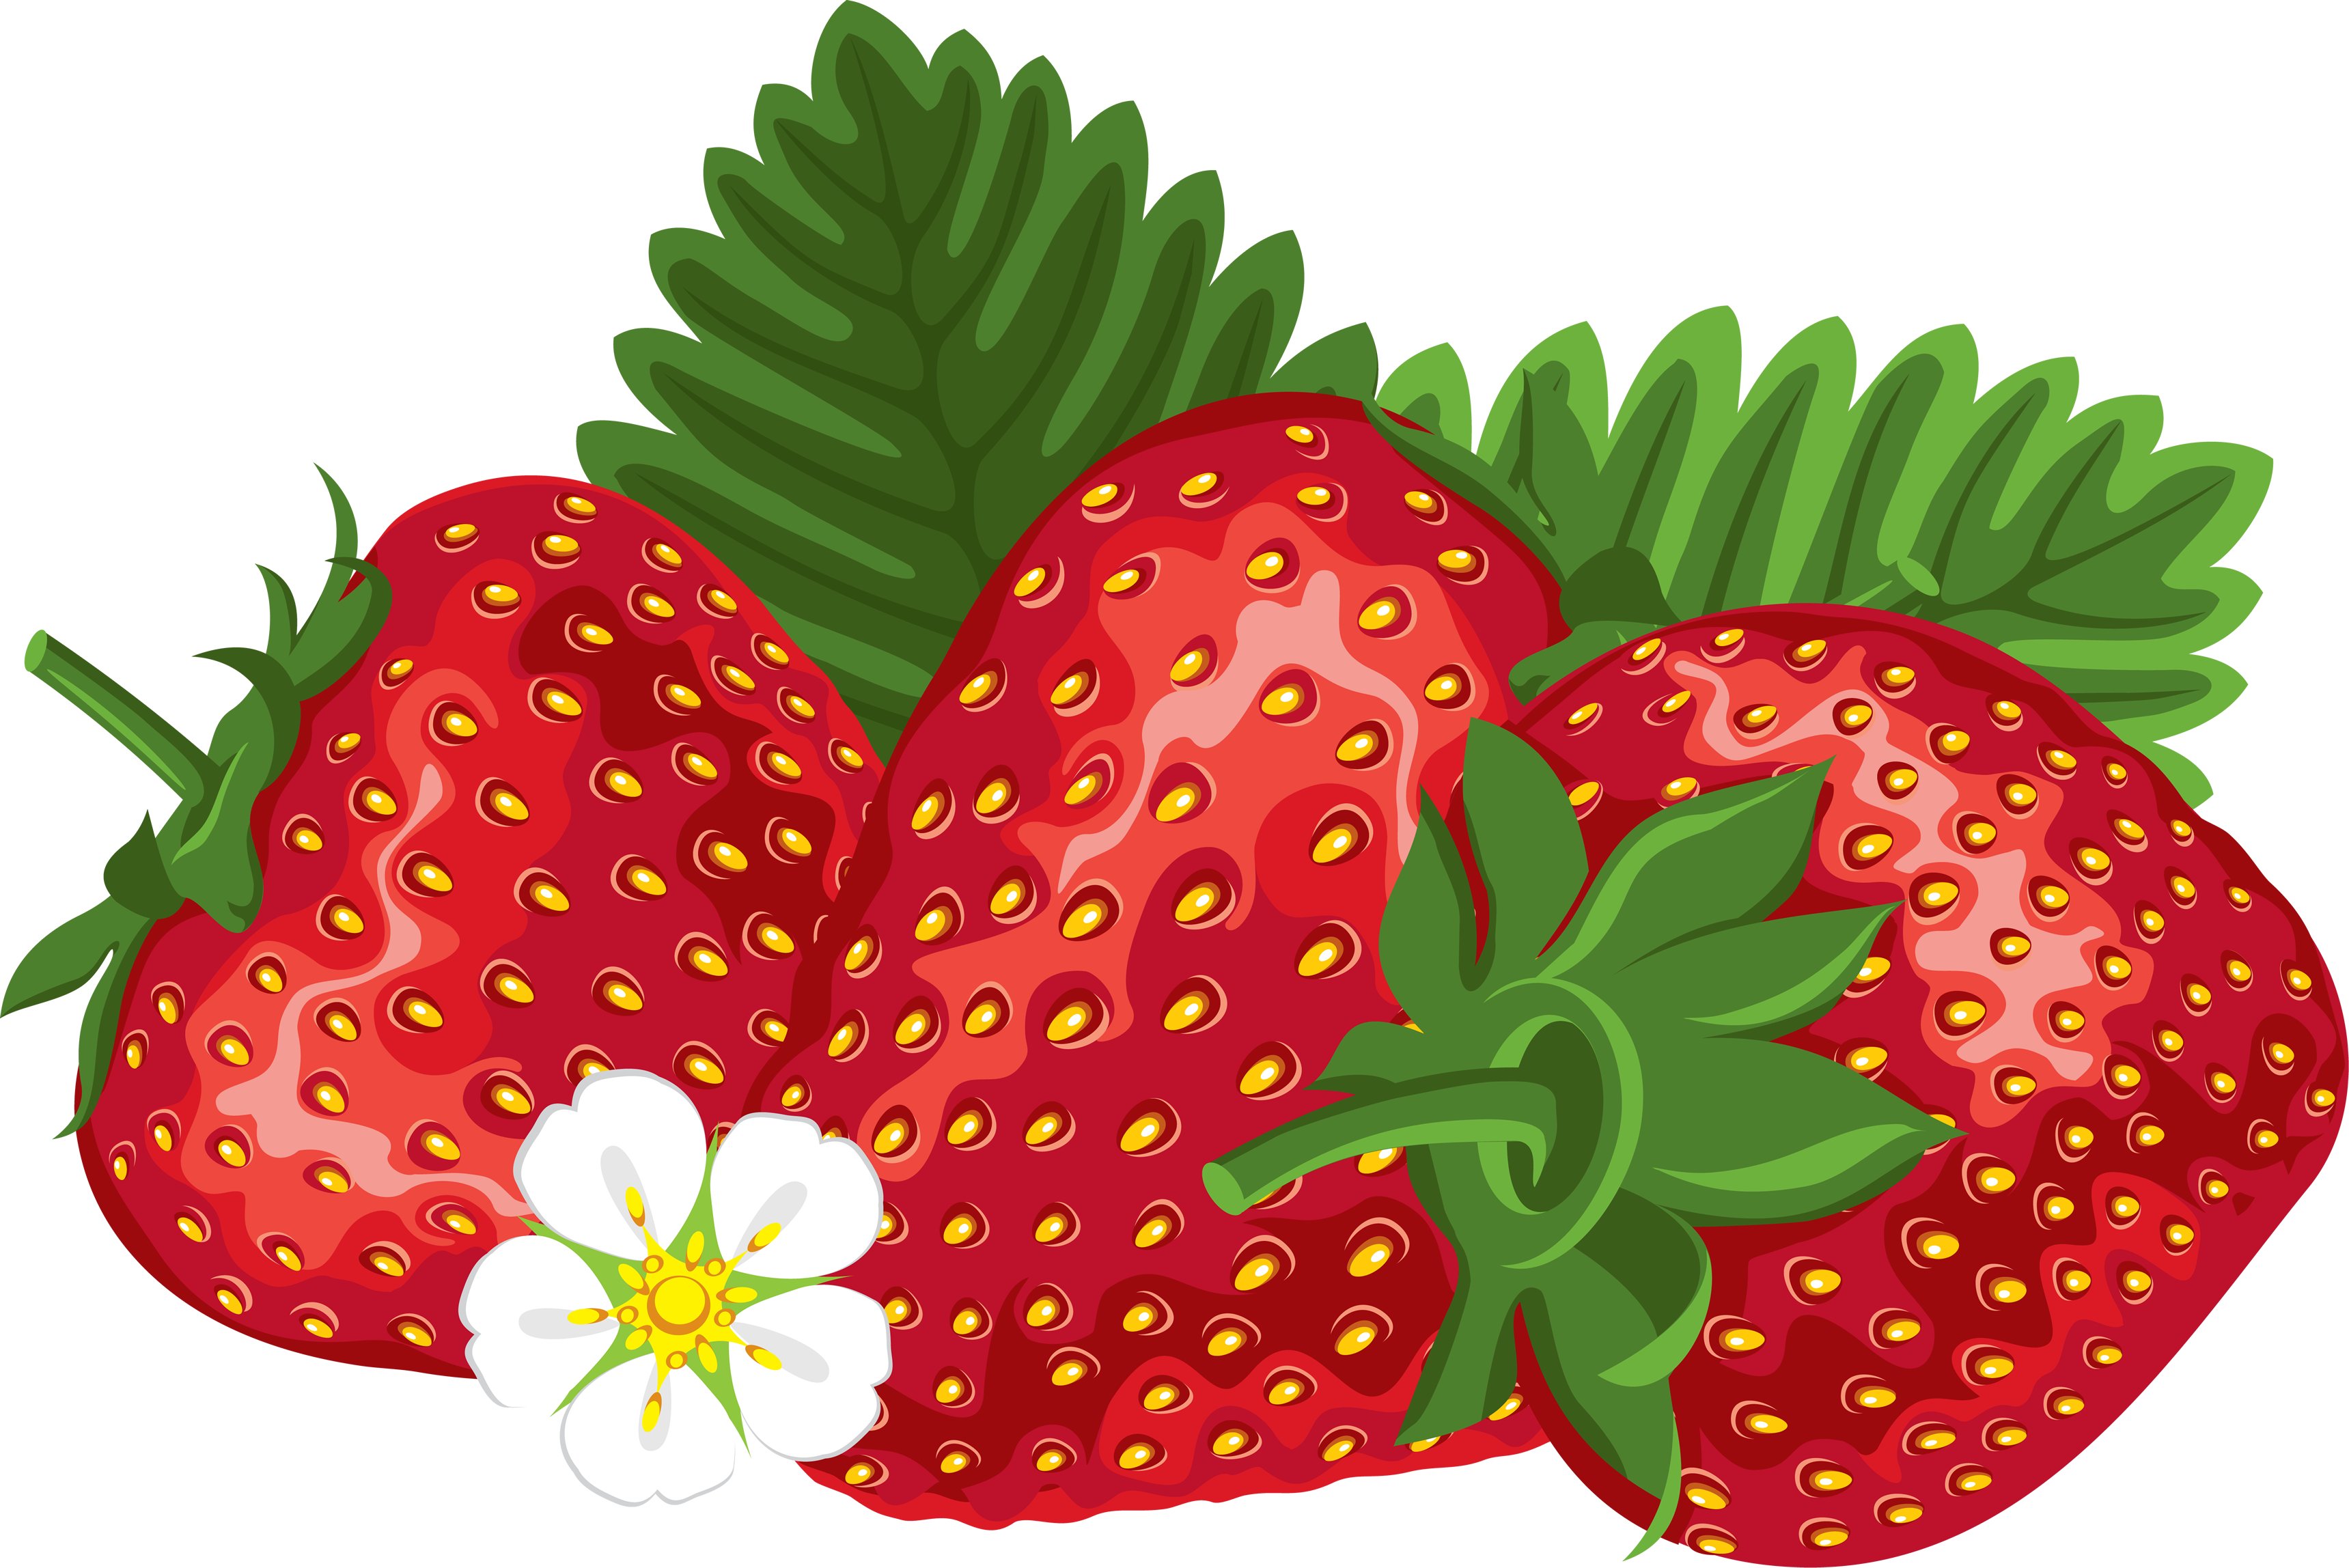 Strawberry farmer strawberries clipart free clip art images image 4